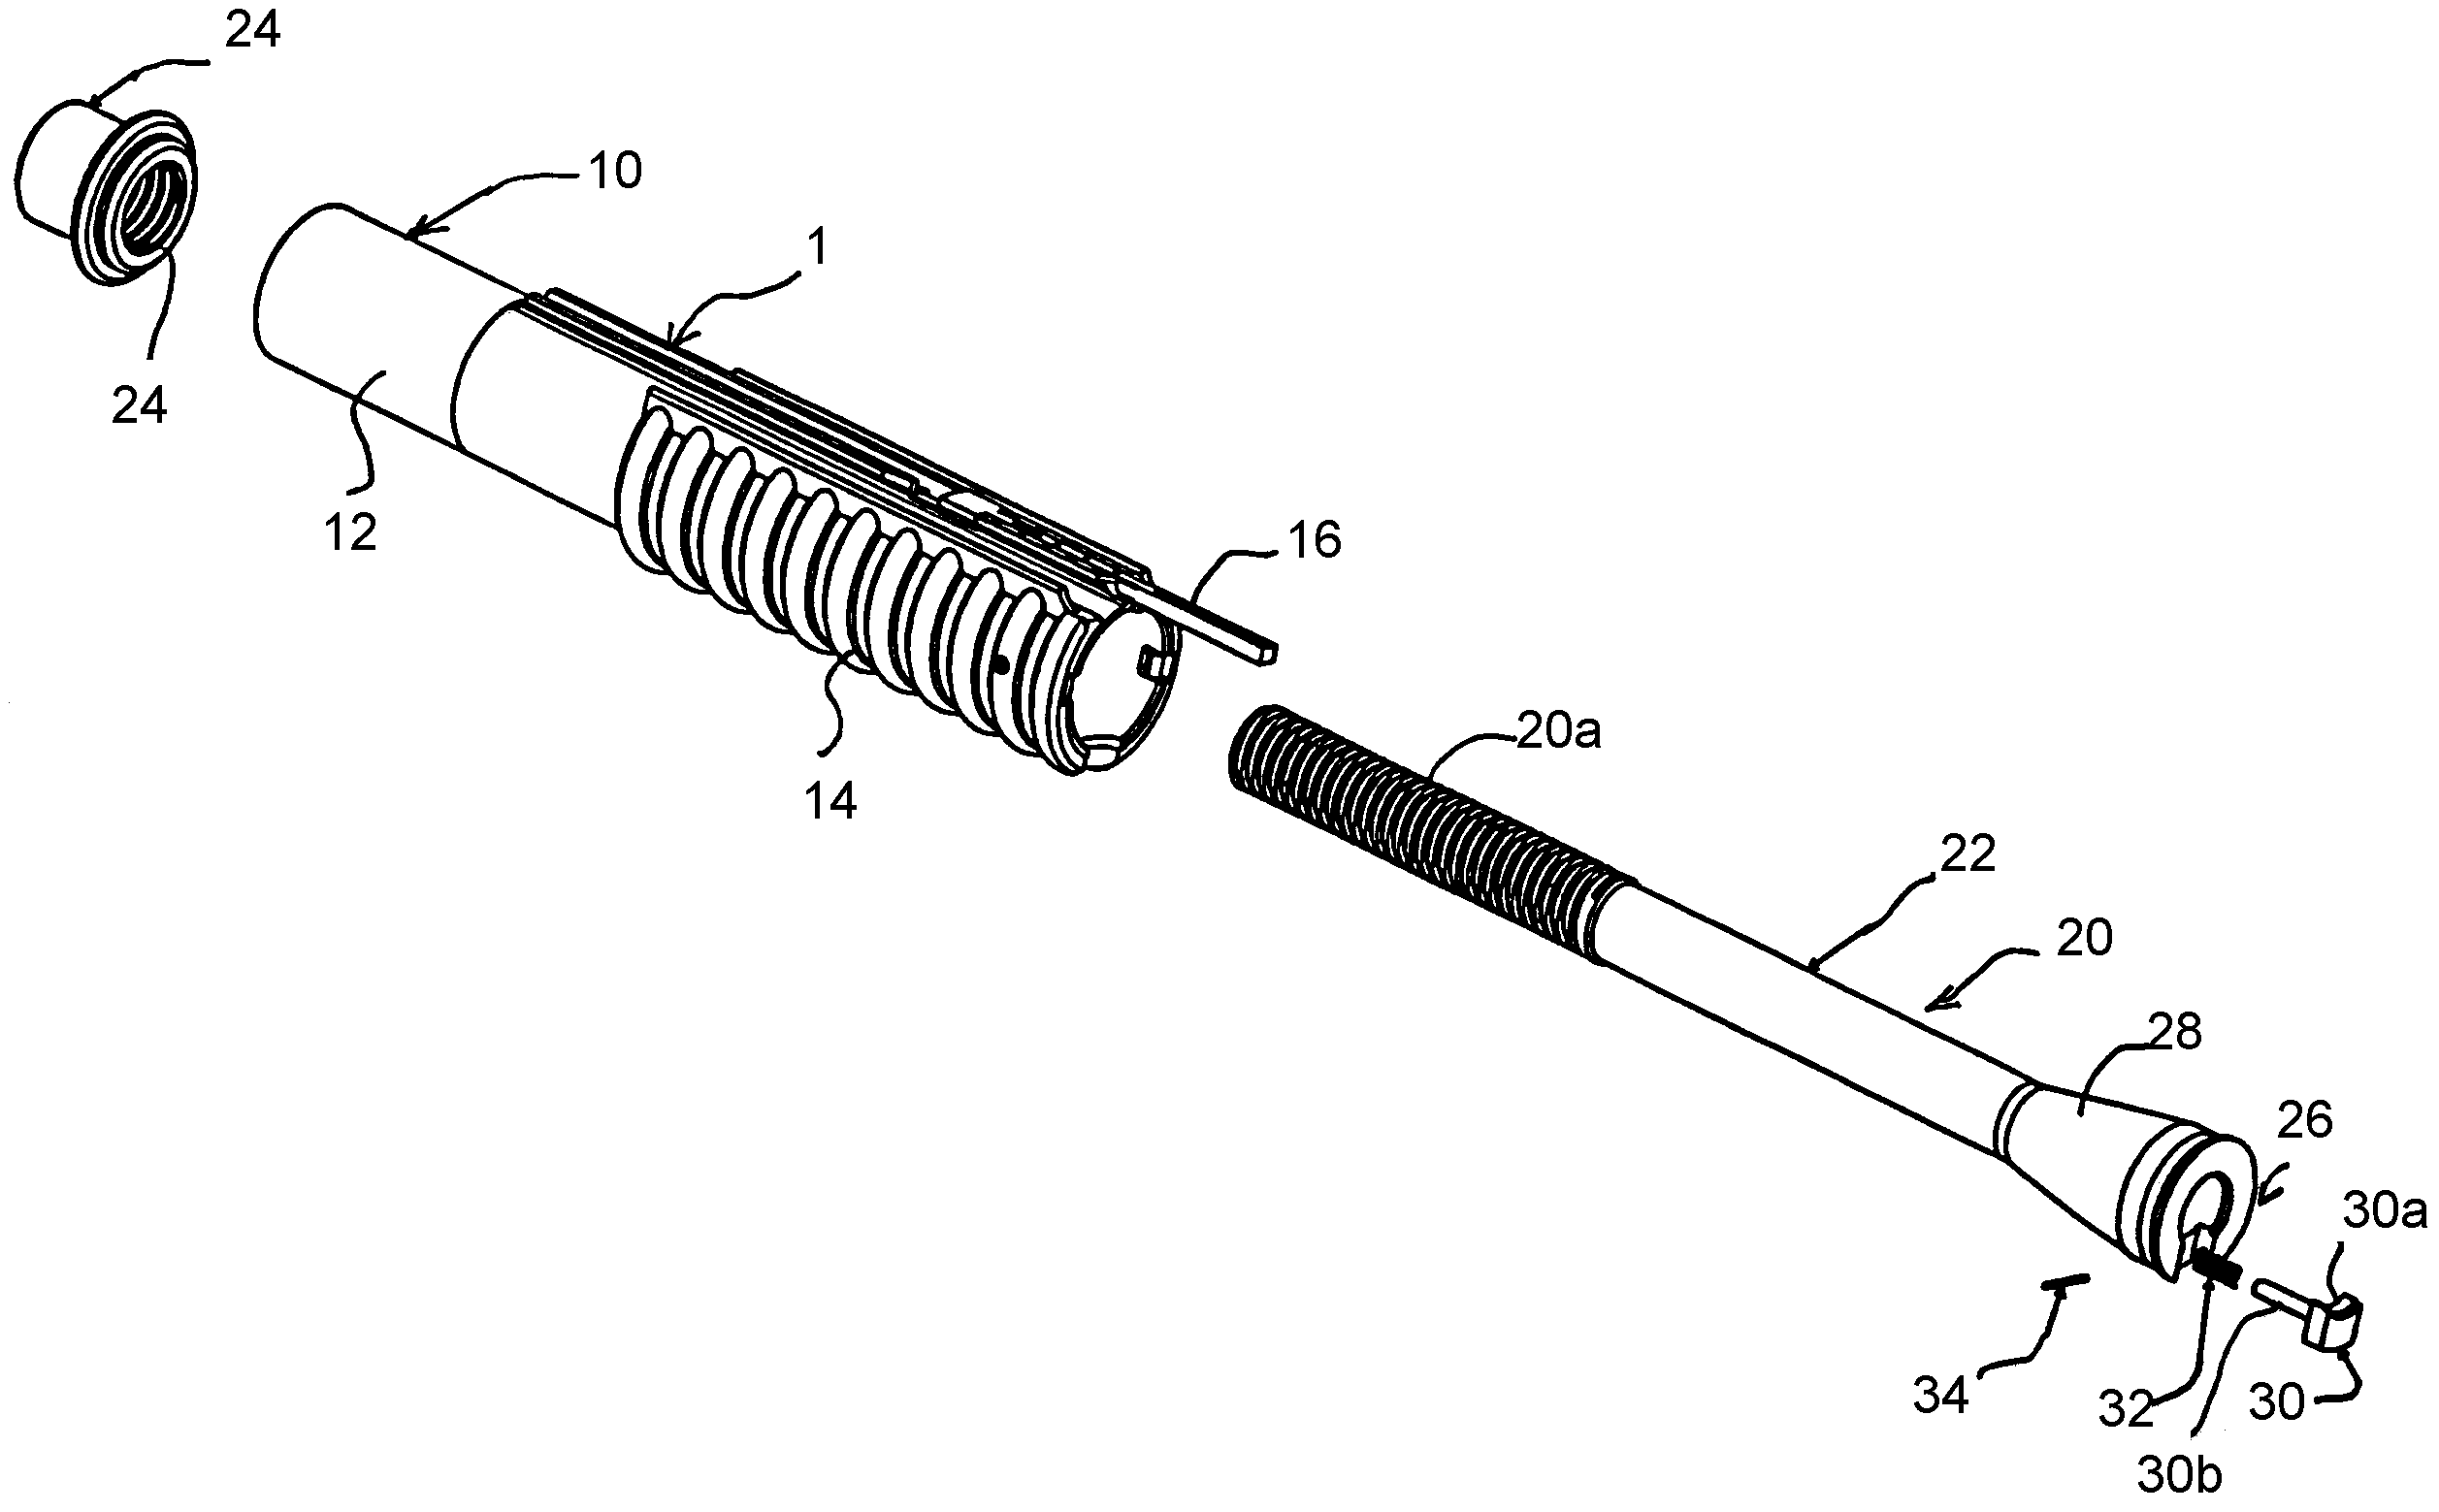 Barrel replacement or insert devices for firearm function conversion